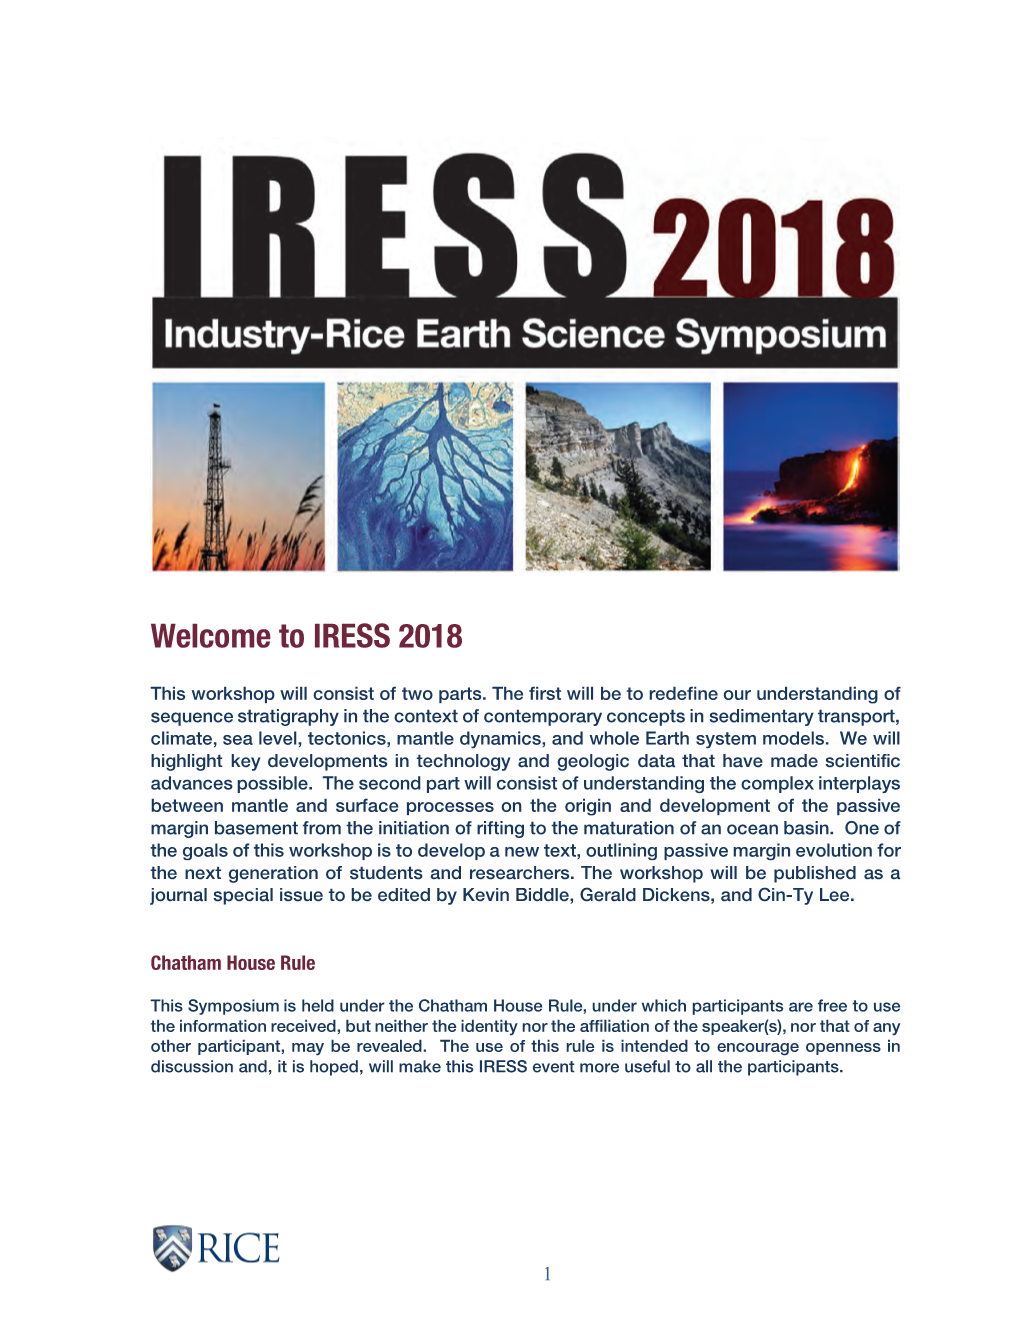 IRESS 2018 Program with Abstracts